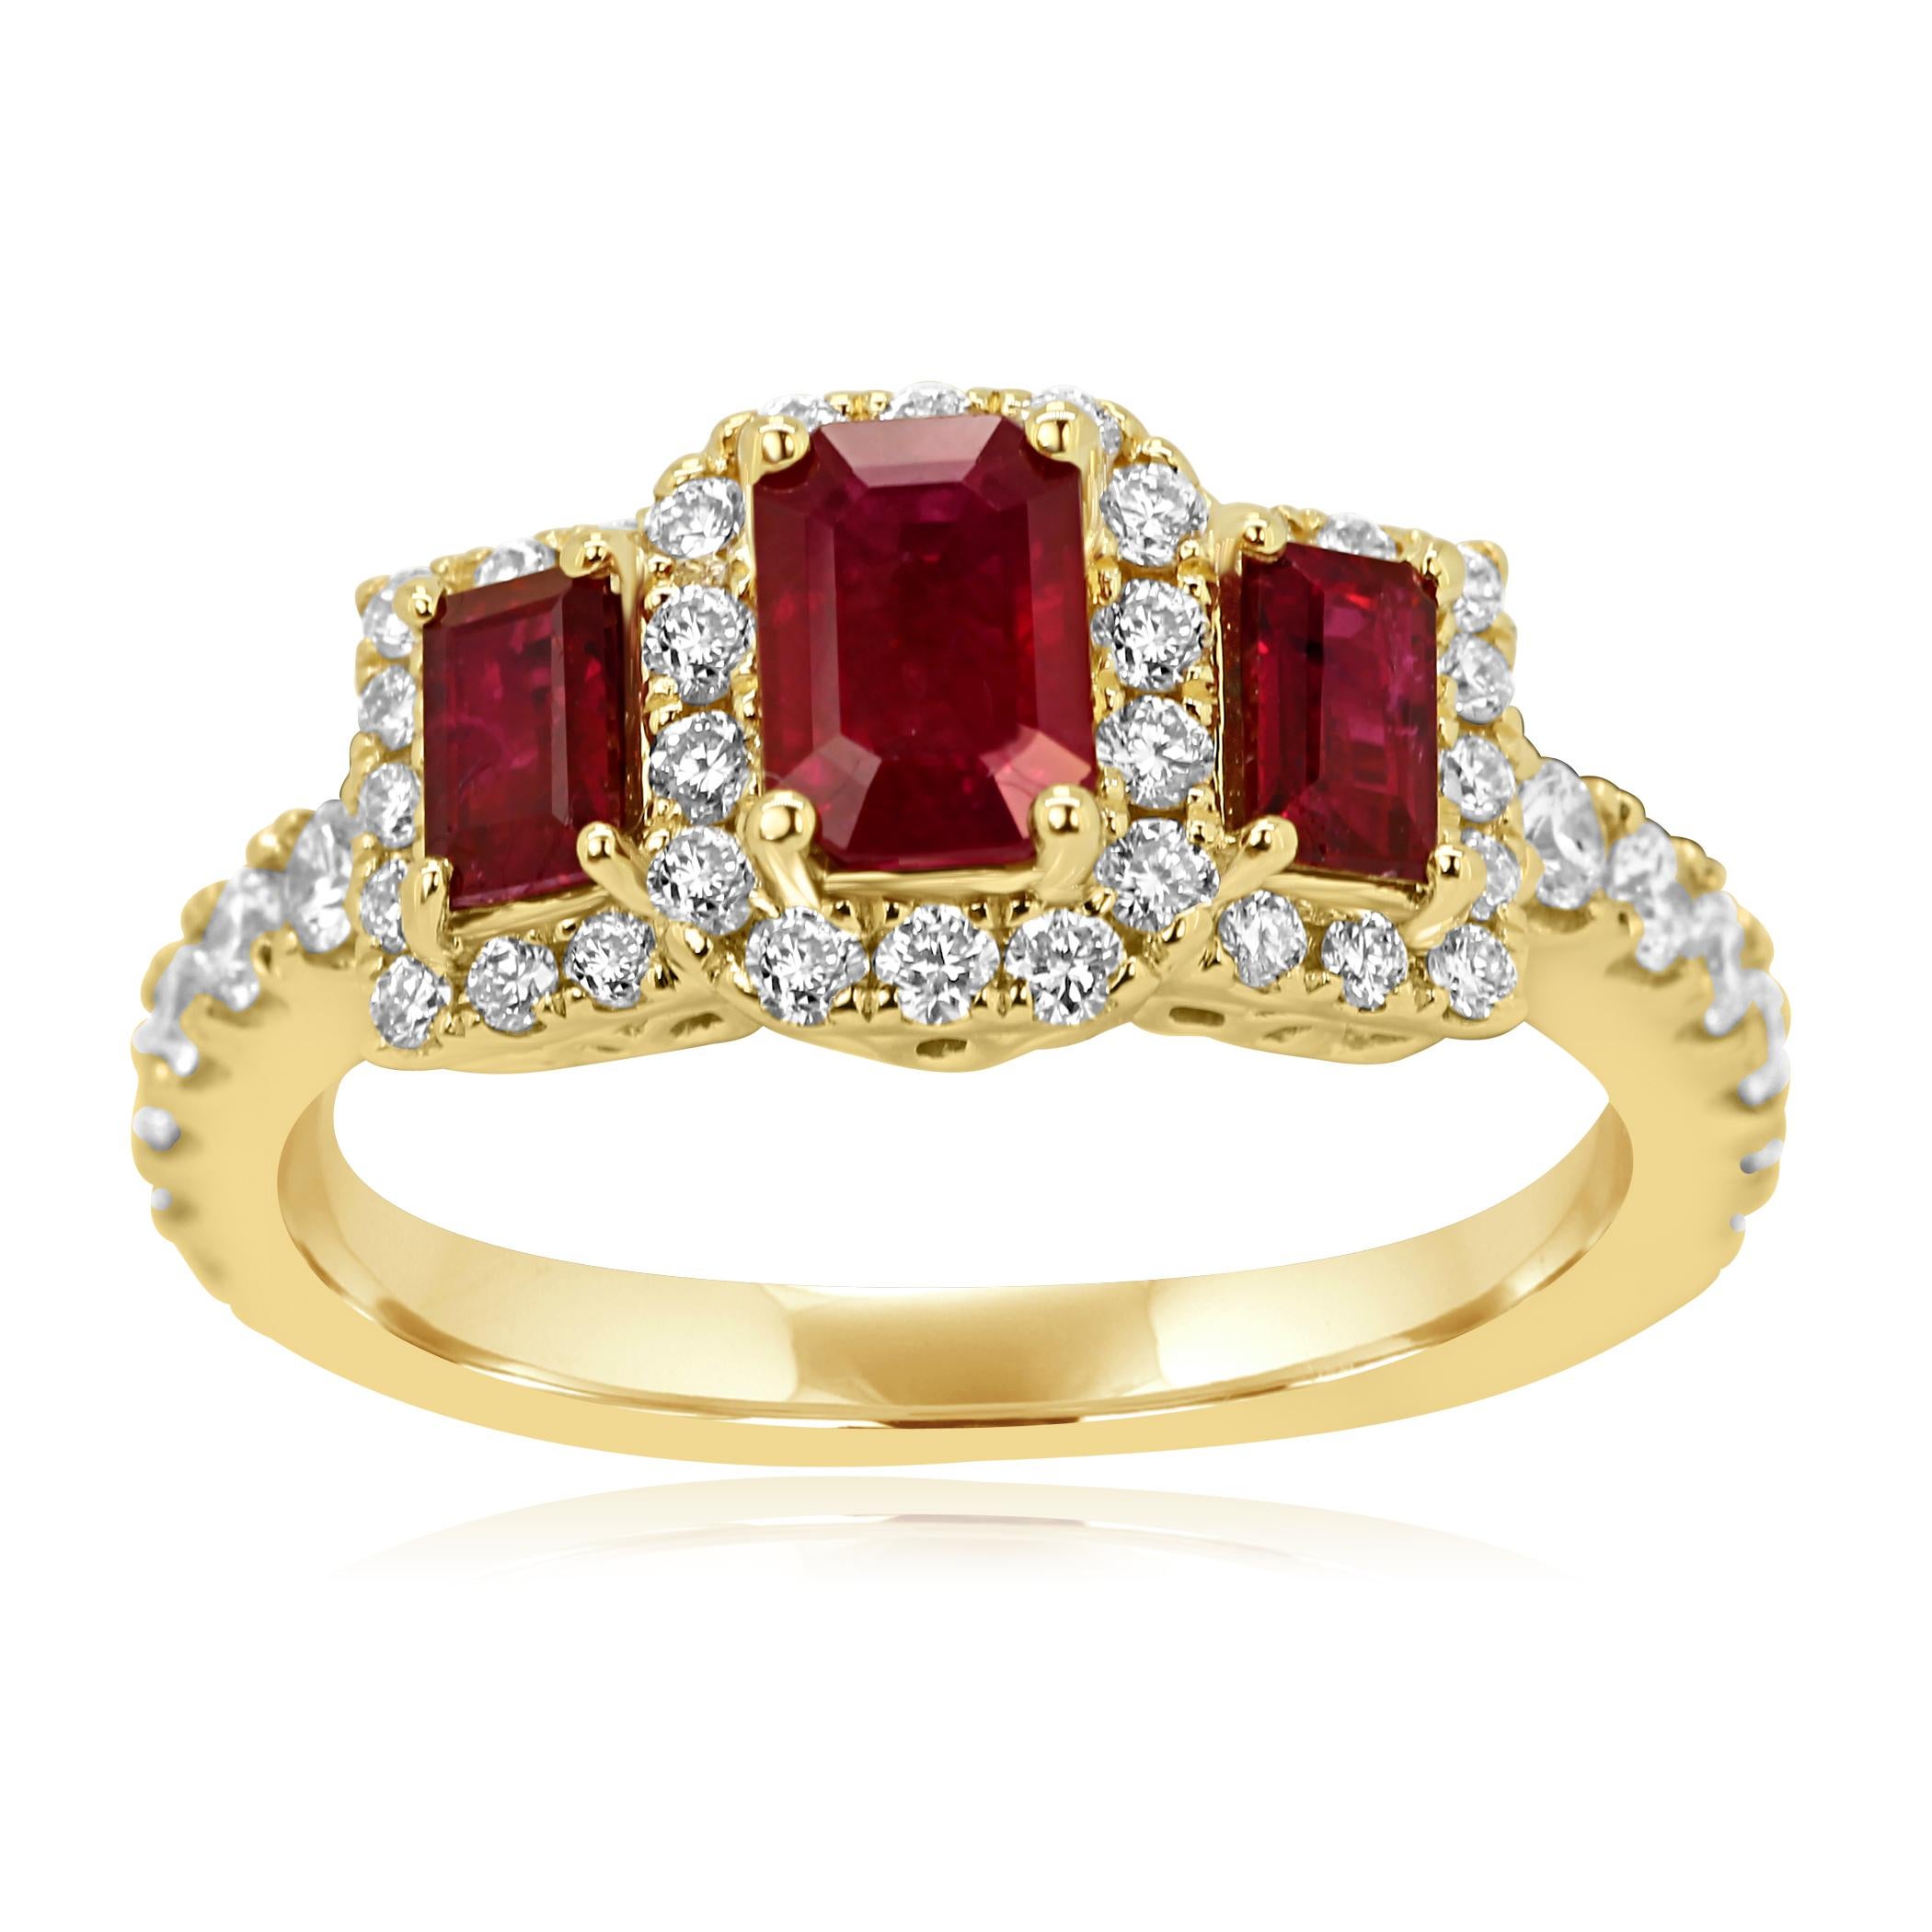 3 Ruby Emerald Cut 1.18 Carat encircled in a single Halo Colorless Diamond VS-SI Clarity 0.70 Carat set in Gorgeous 14K Yellow Gold Three Stone Bridal Fashion Ring.

Style available in different price ranges. Prices are based on your selection of